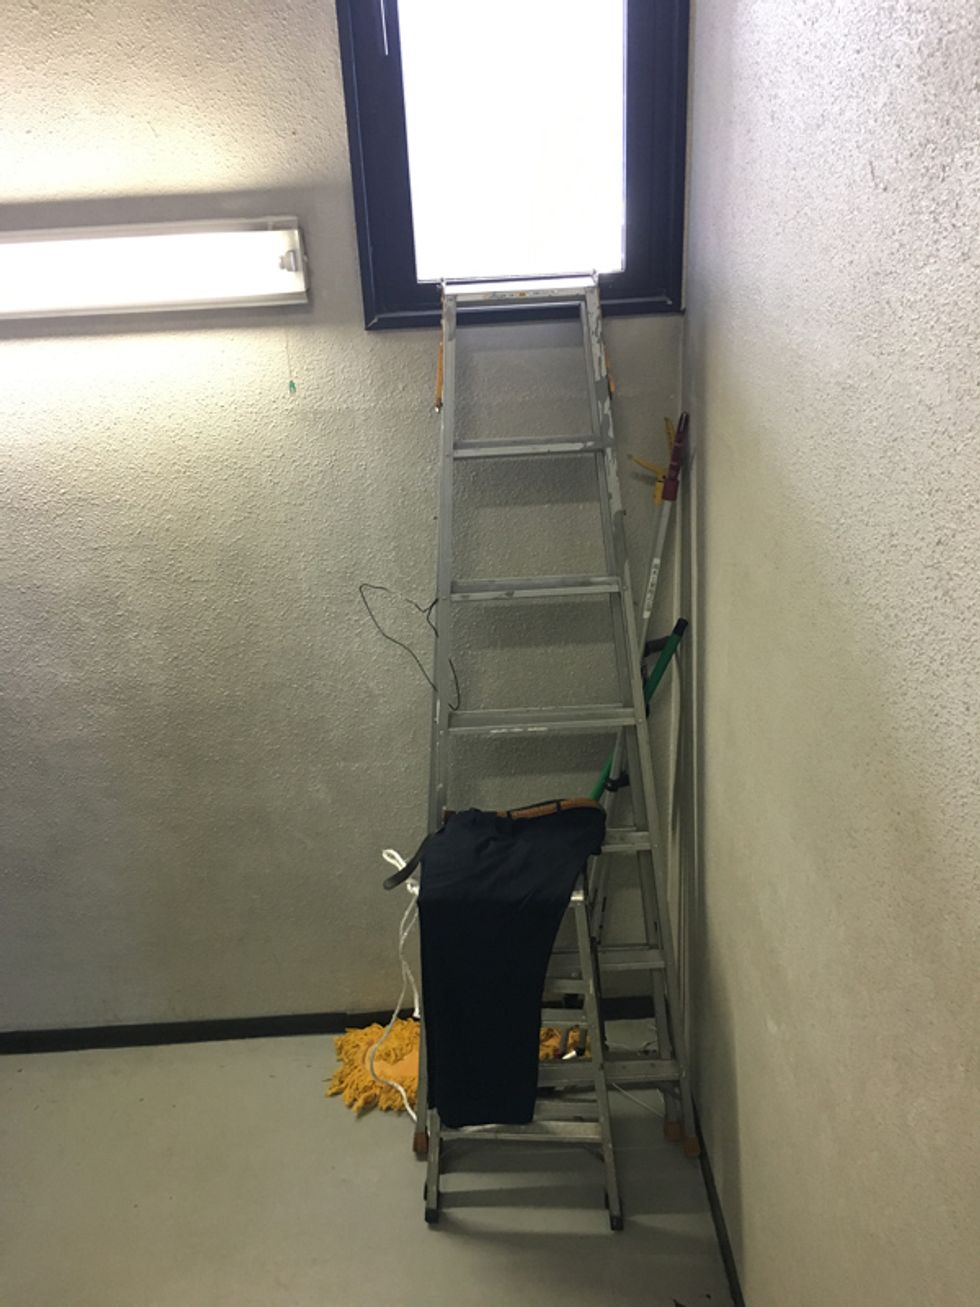 Ladder with mop propped next to it, a pair of men\u2019s trousers slung over a middle rung.